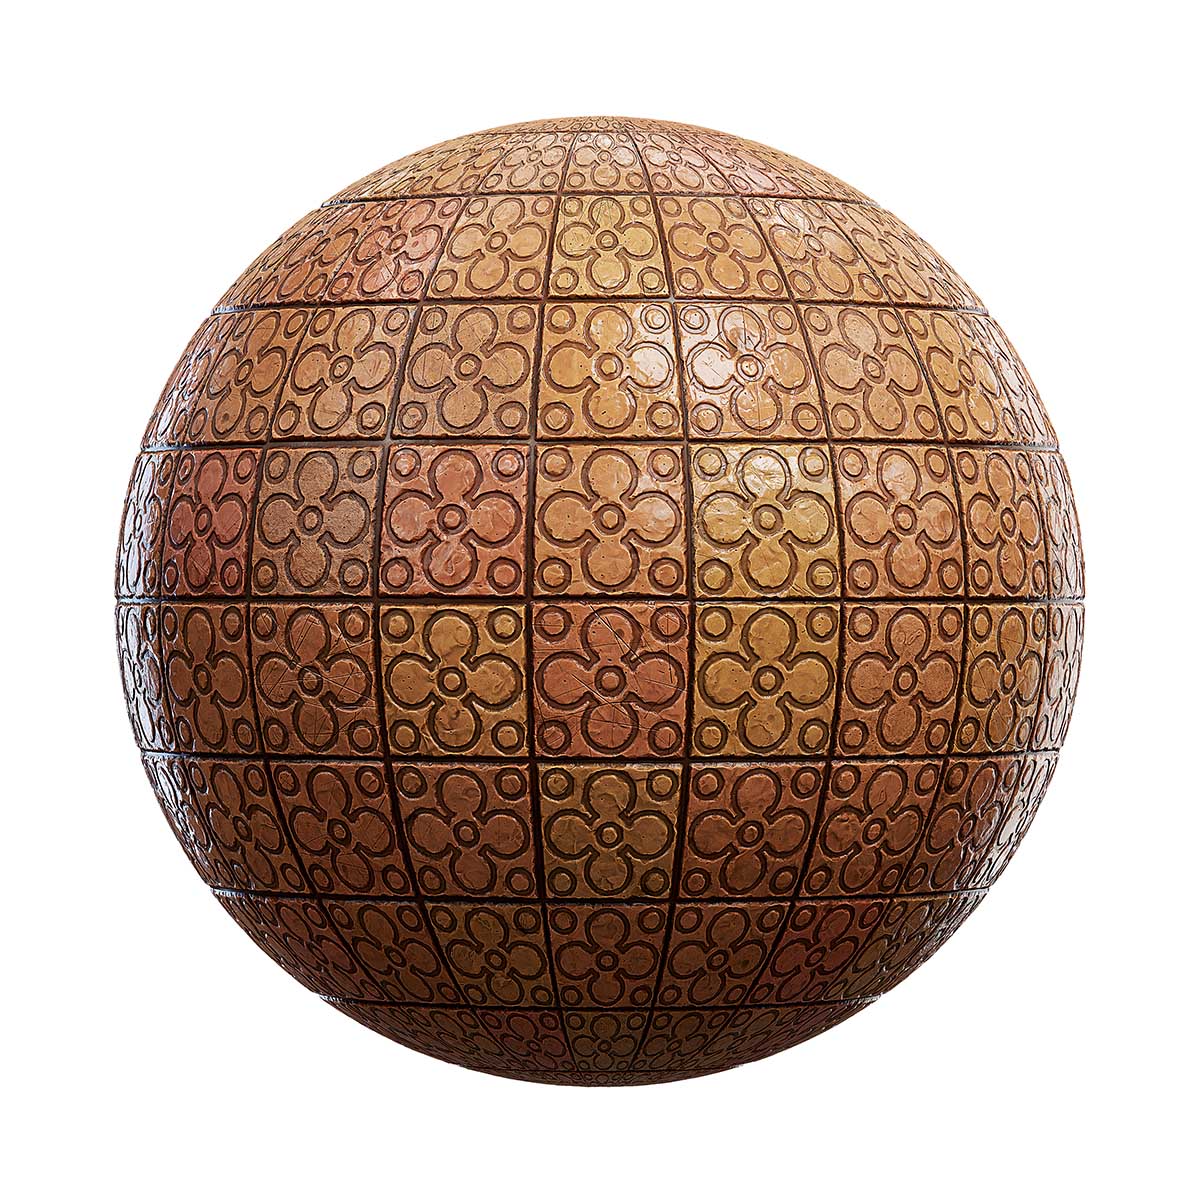 Patterned Brown Clay PBR Texture